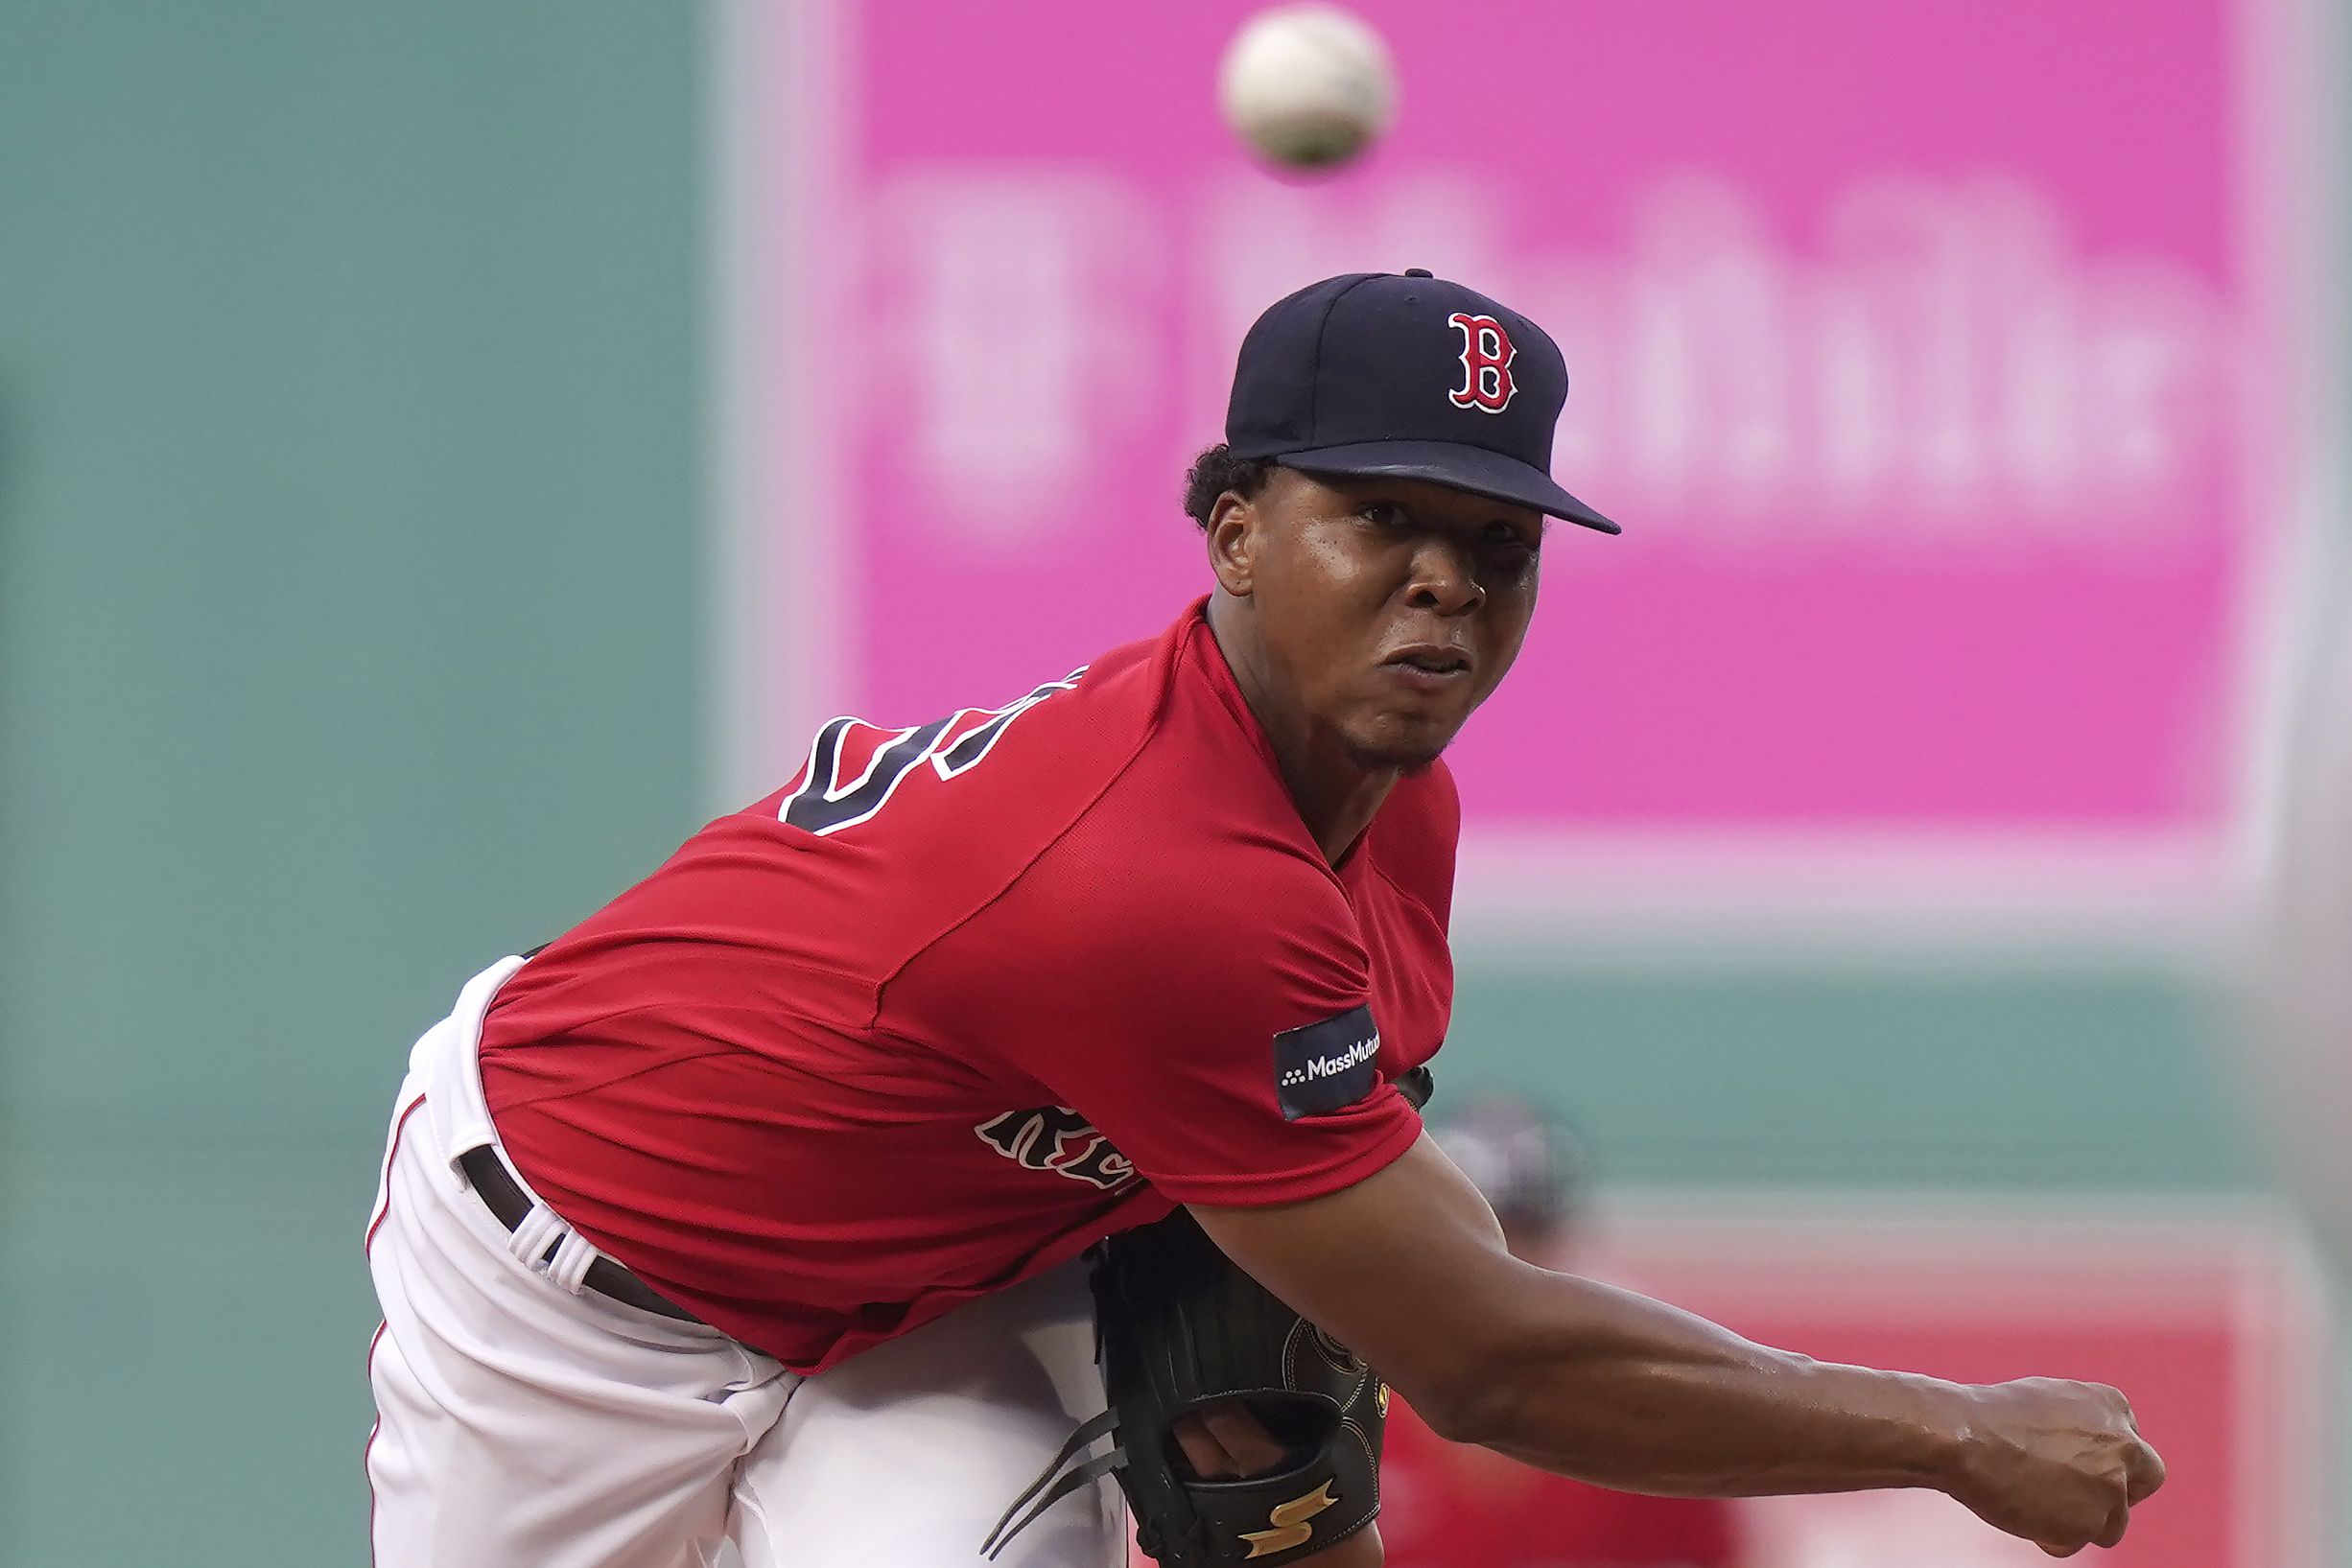 Inside Bello Day: How Brayan Bello has earned the trust of Red Sox fans